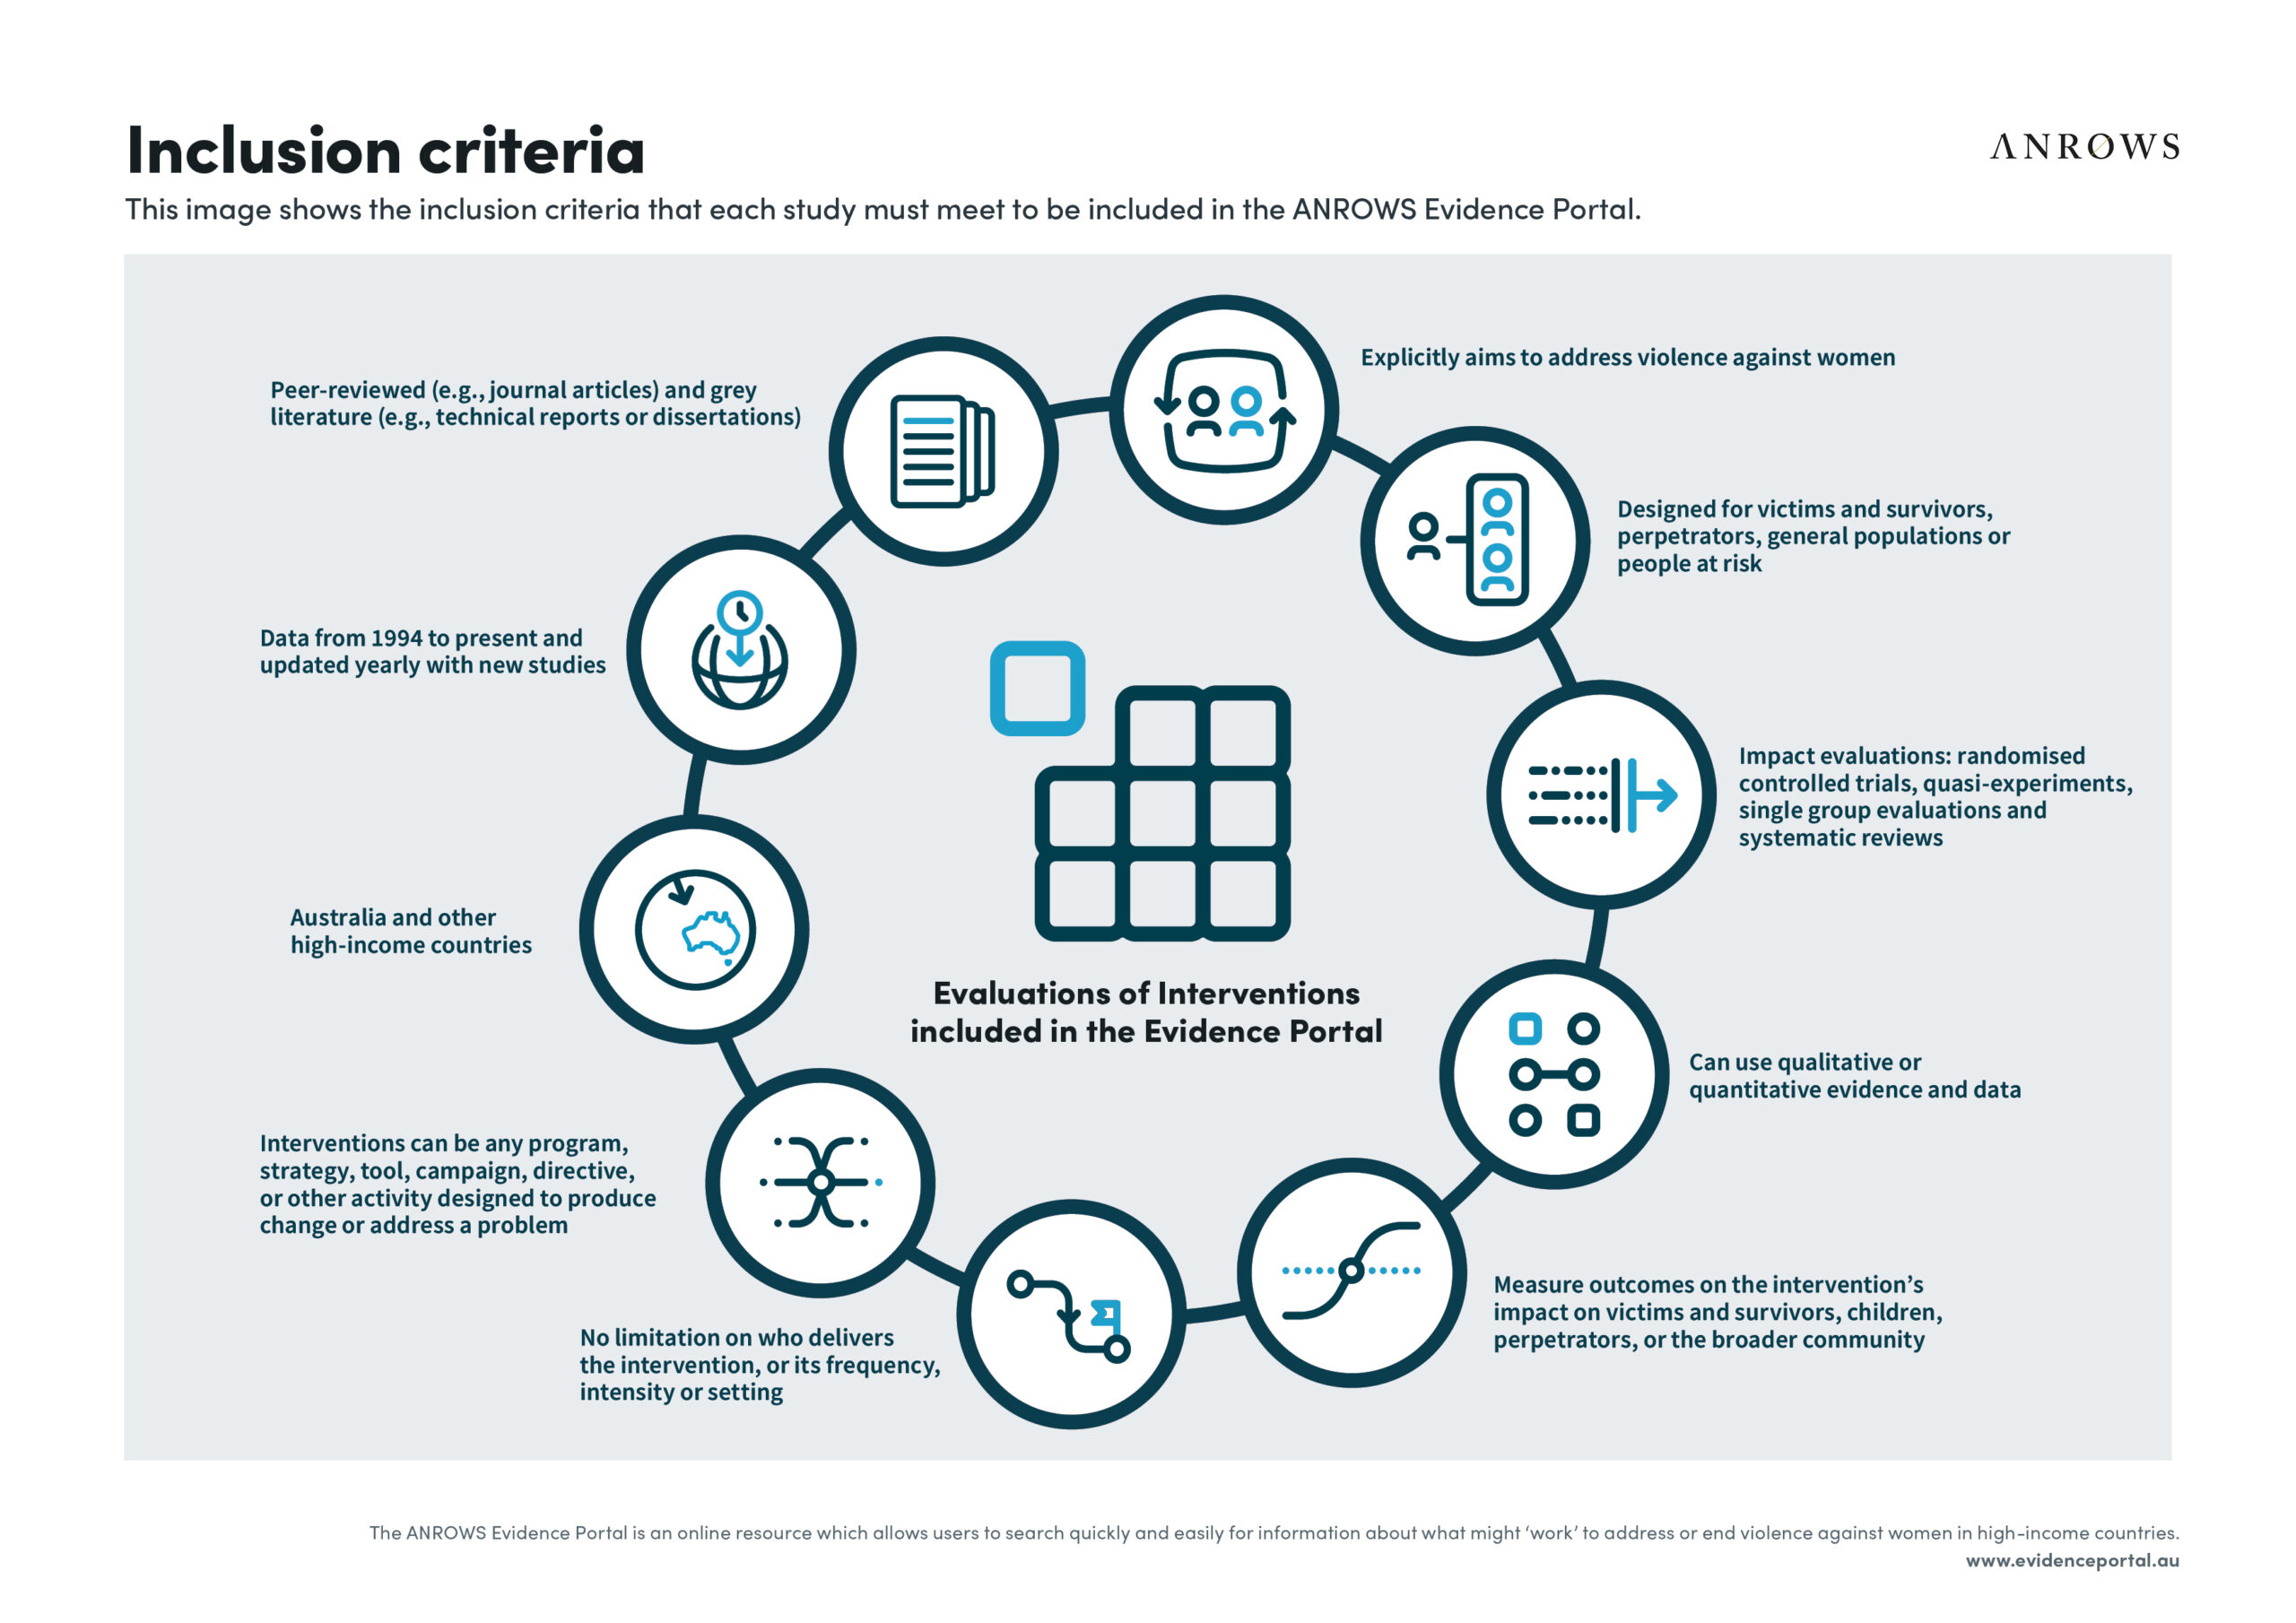 Infographics shows a visual summary of the inclusion criteria.